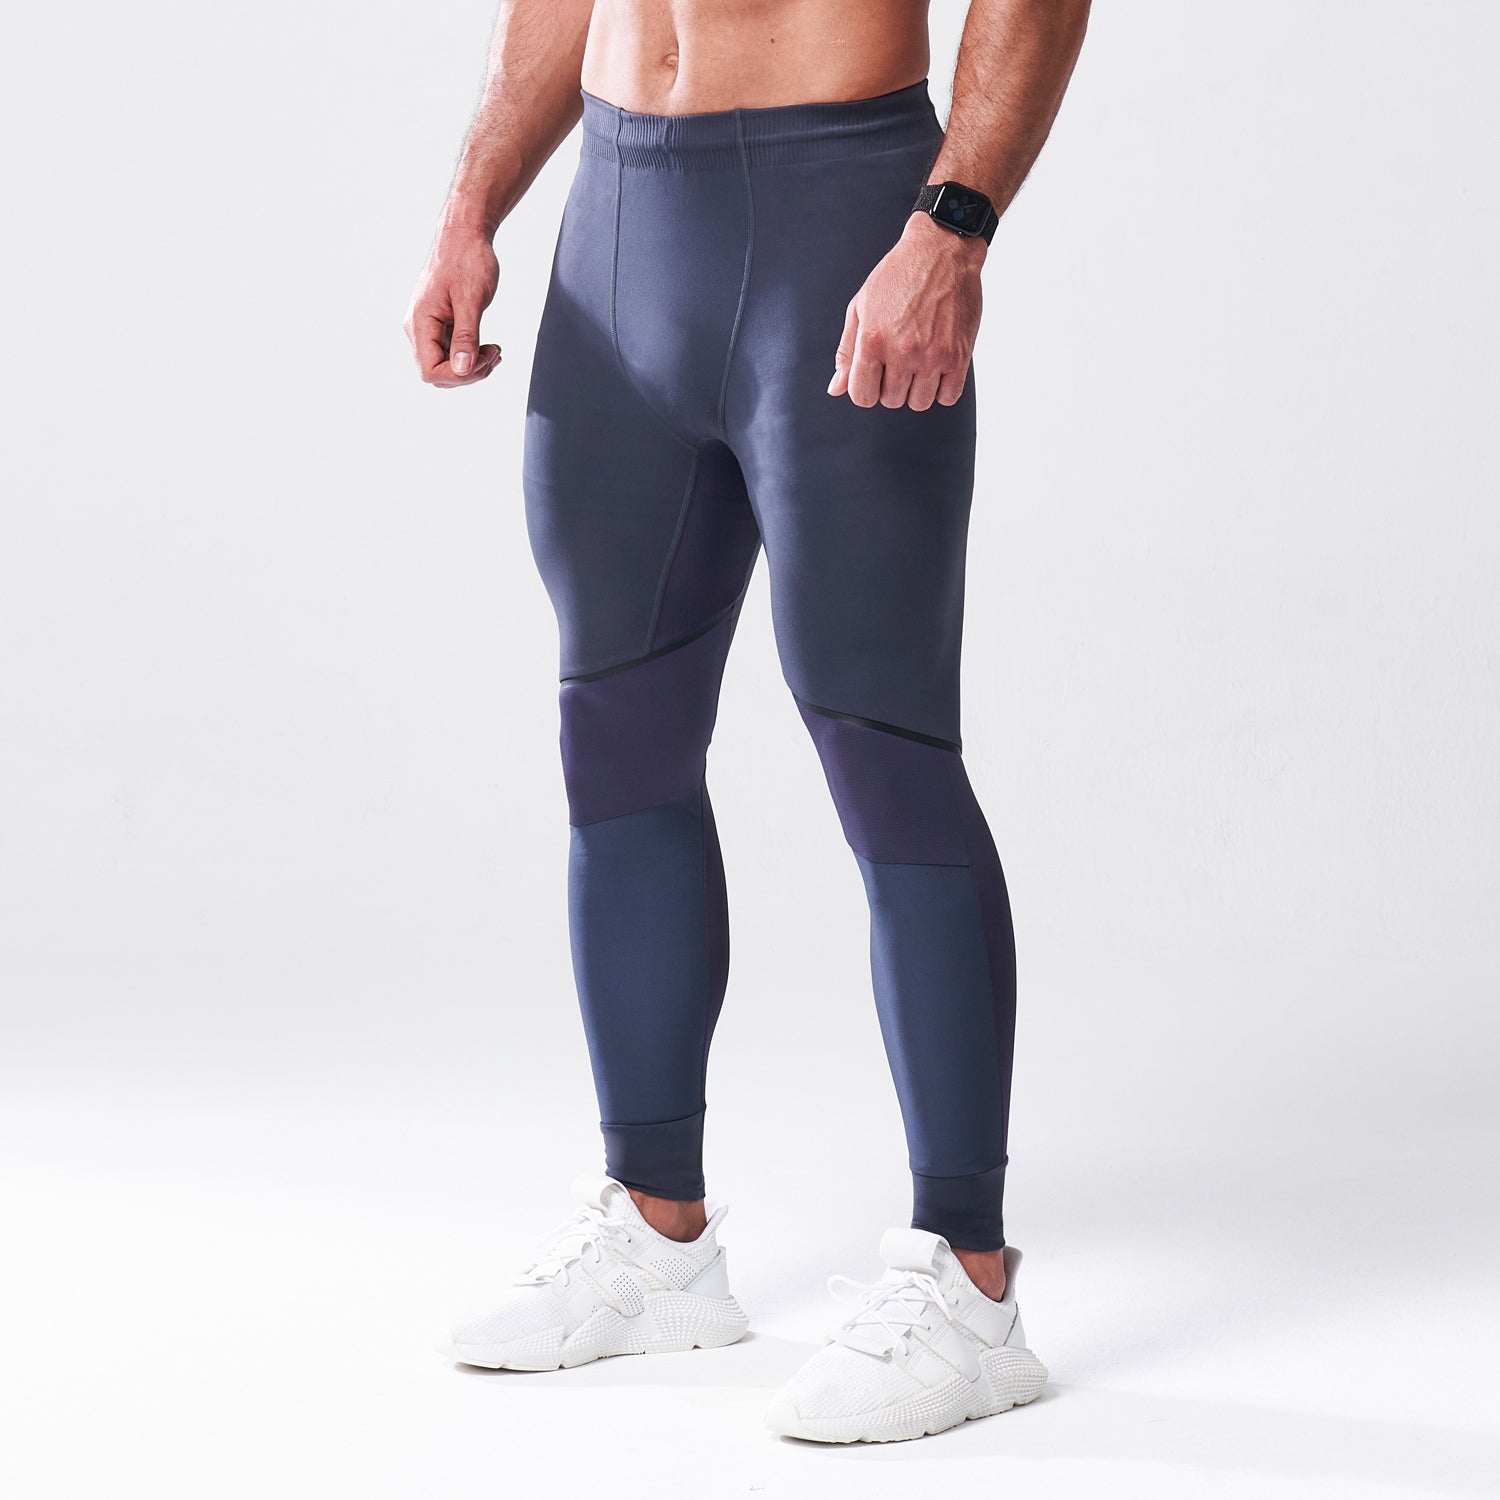 squatwolf-gym-wear-lab360-impact-tight-india-ink-workout-tights-for-men